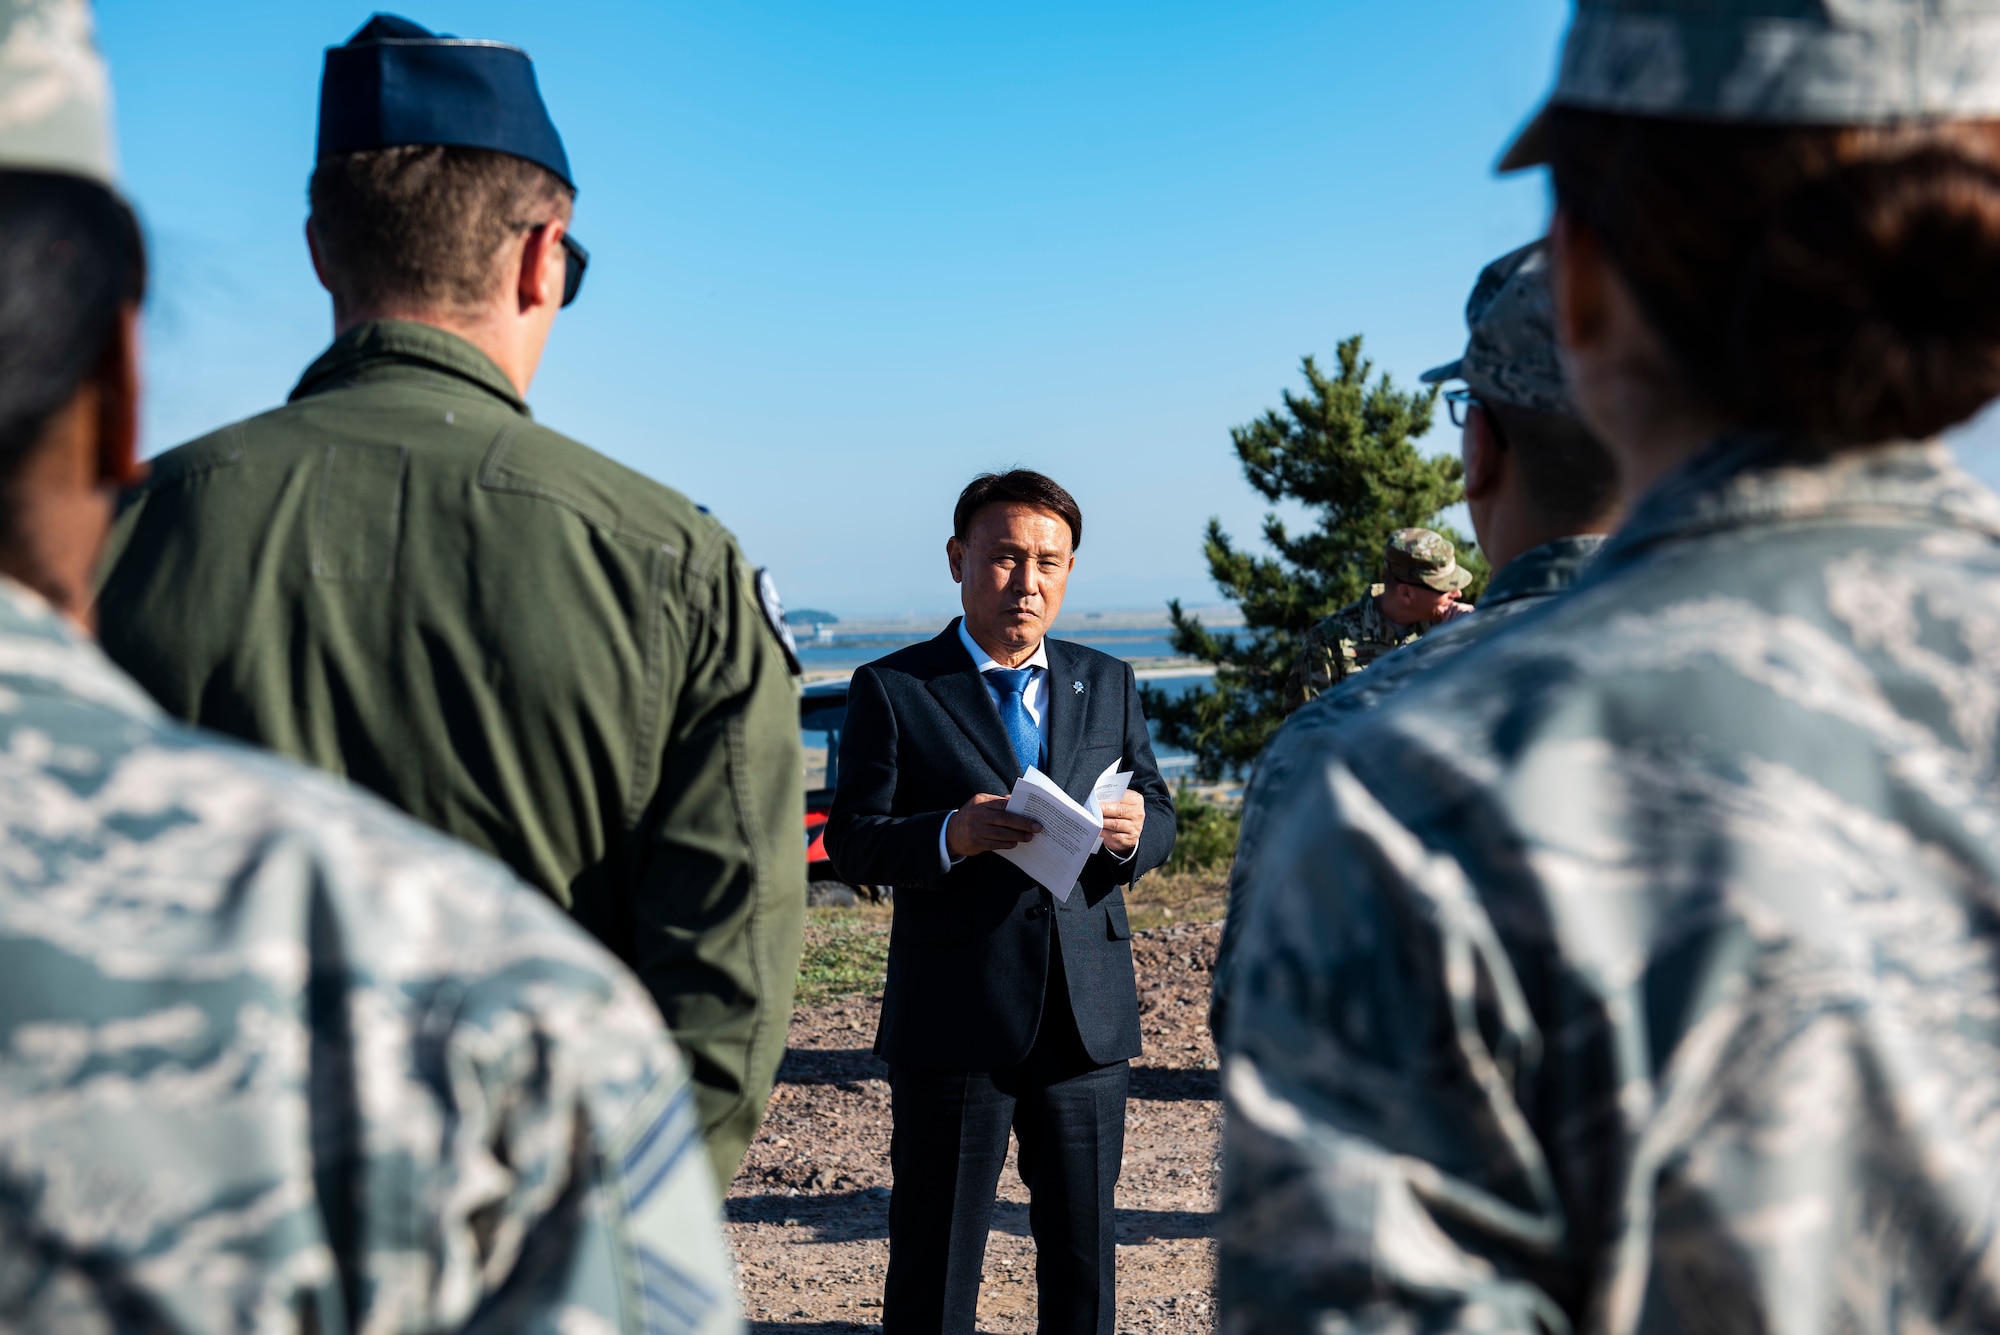 Kang Imjune, Mayor of Gunsan, is briefed by members of the 8th Fighter Wing at Kunsan Air Base, Republic of Korea, Oct. 19, 2018. Mayor Imjune had a chance to see the partnership between the 38th Fighter Group, Republic of Korea Air Force, and the 8th FW first hand, which reinforces the strong relationship between Kunsan AB and Gunsan City . (U.S. Air Force photo by Senior Airman Stefan Alvarez)